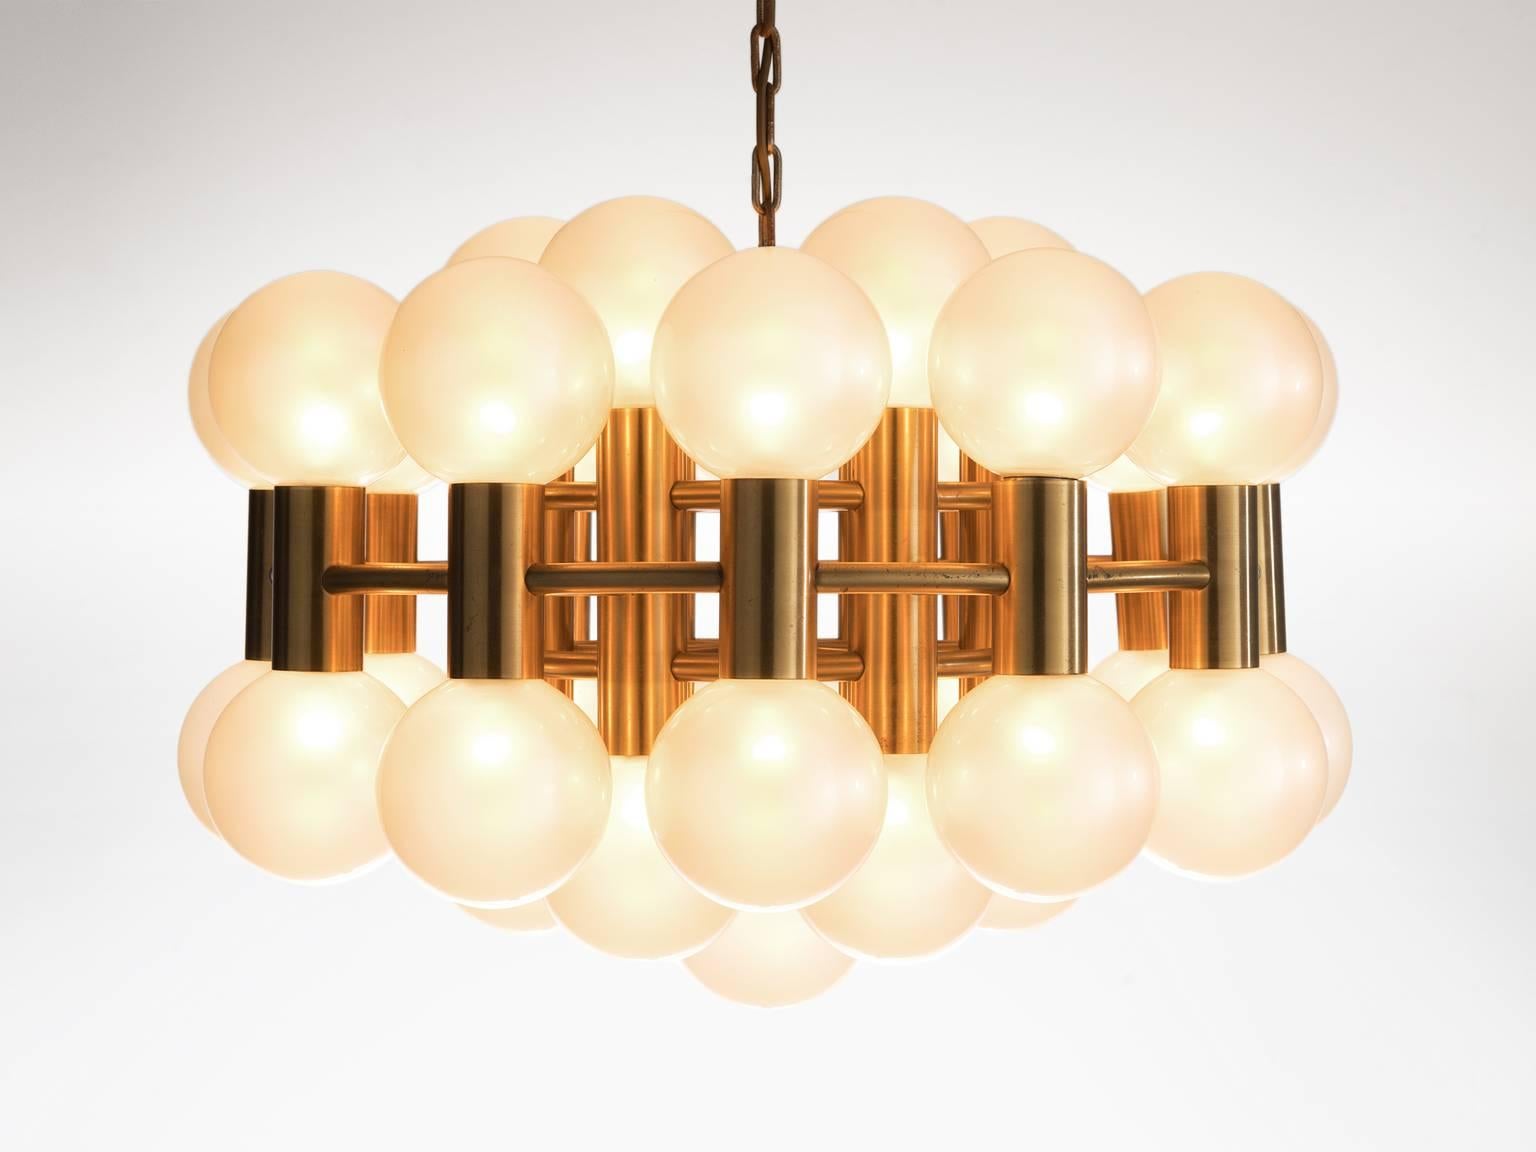 Chandelier, glass and metal, attributed to Motoko Ishii for Staff, Germany, 1970s. 

This chandelier spreads the light of the large amount of 37 spheres, divided over two levels. The metal frame is nice brass-gold colored, which beautifully combines